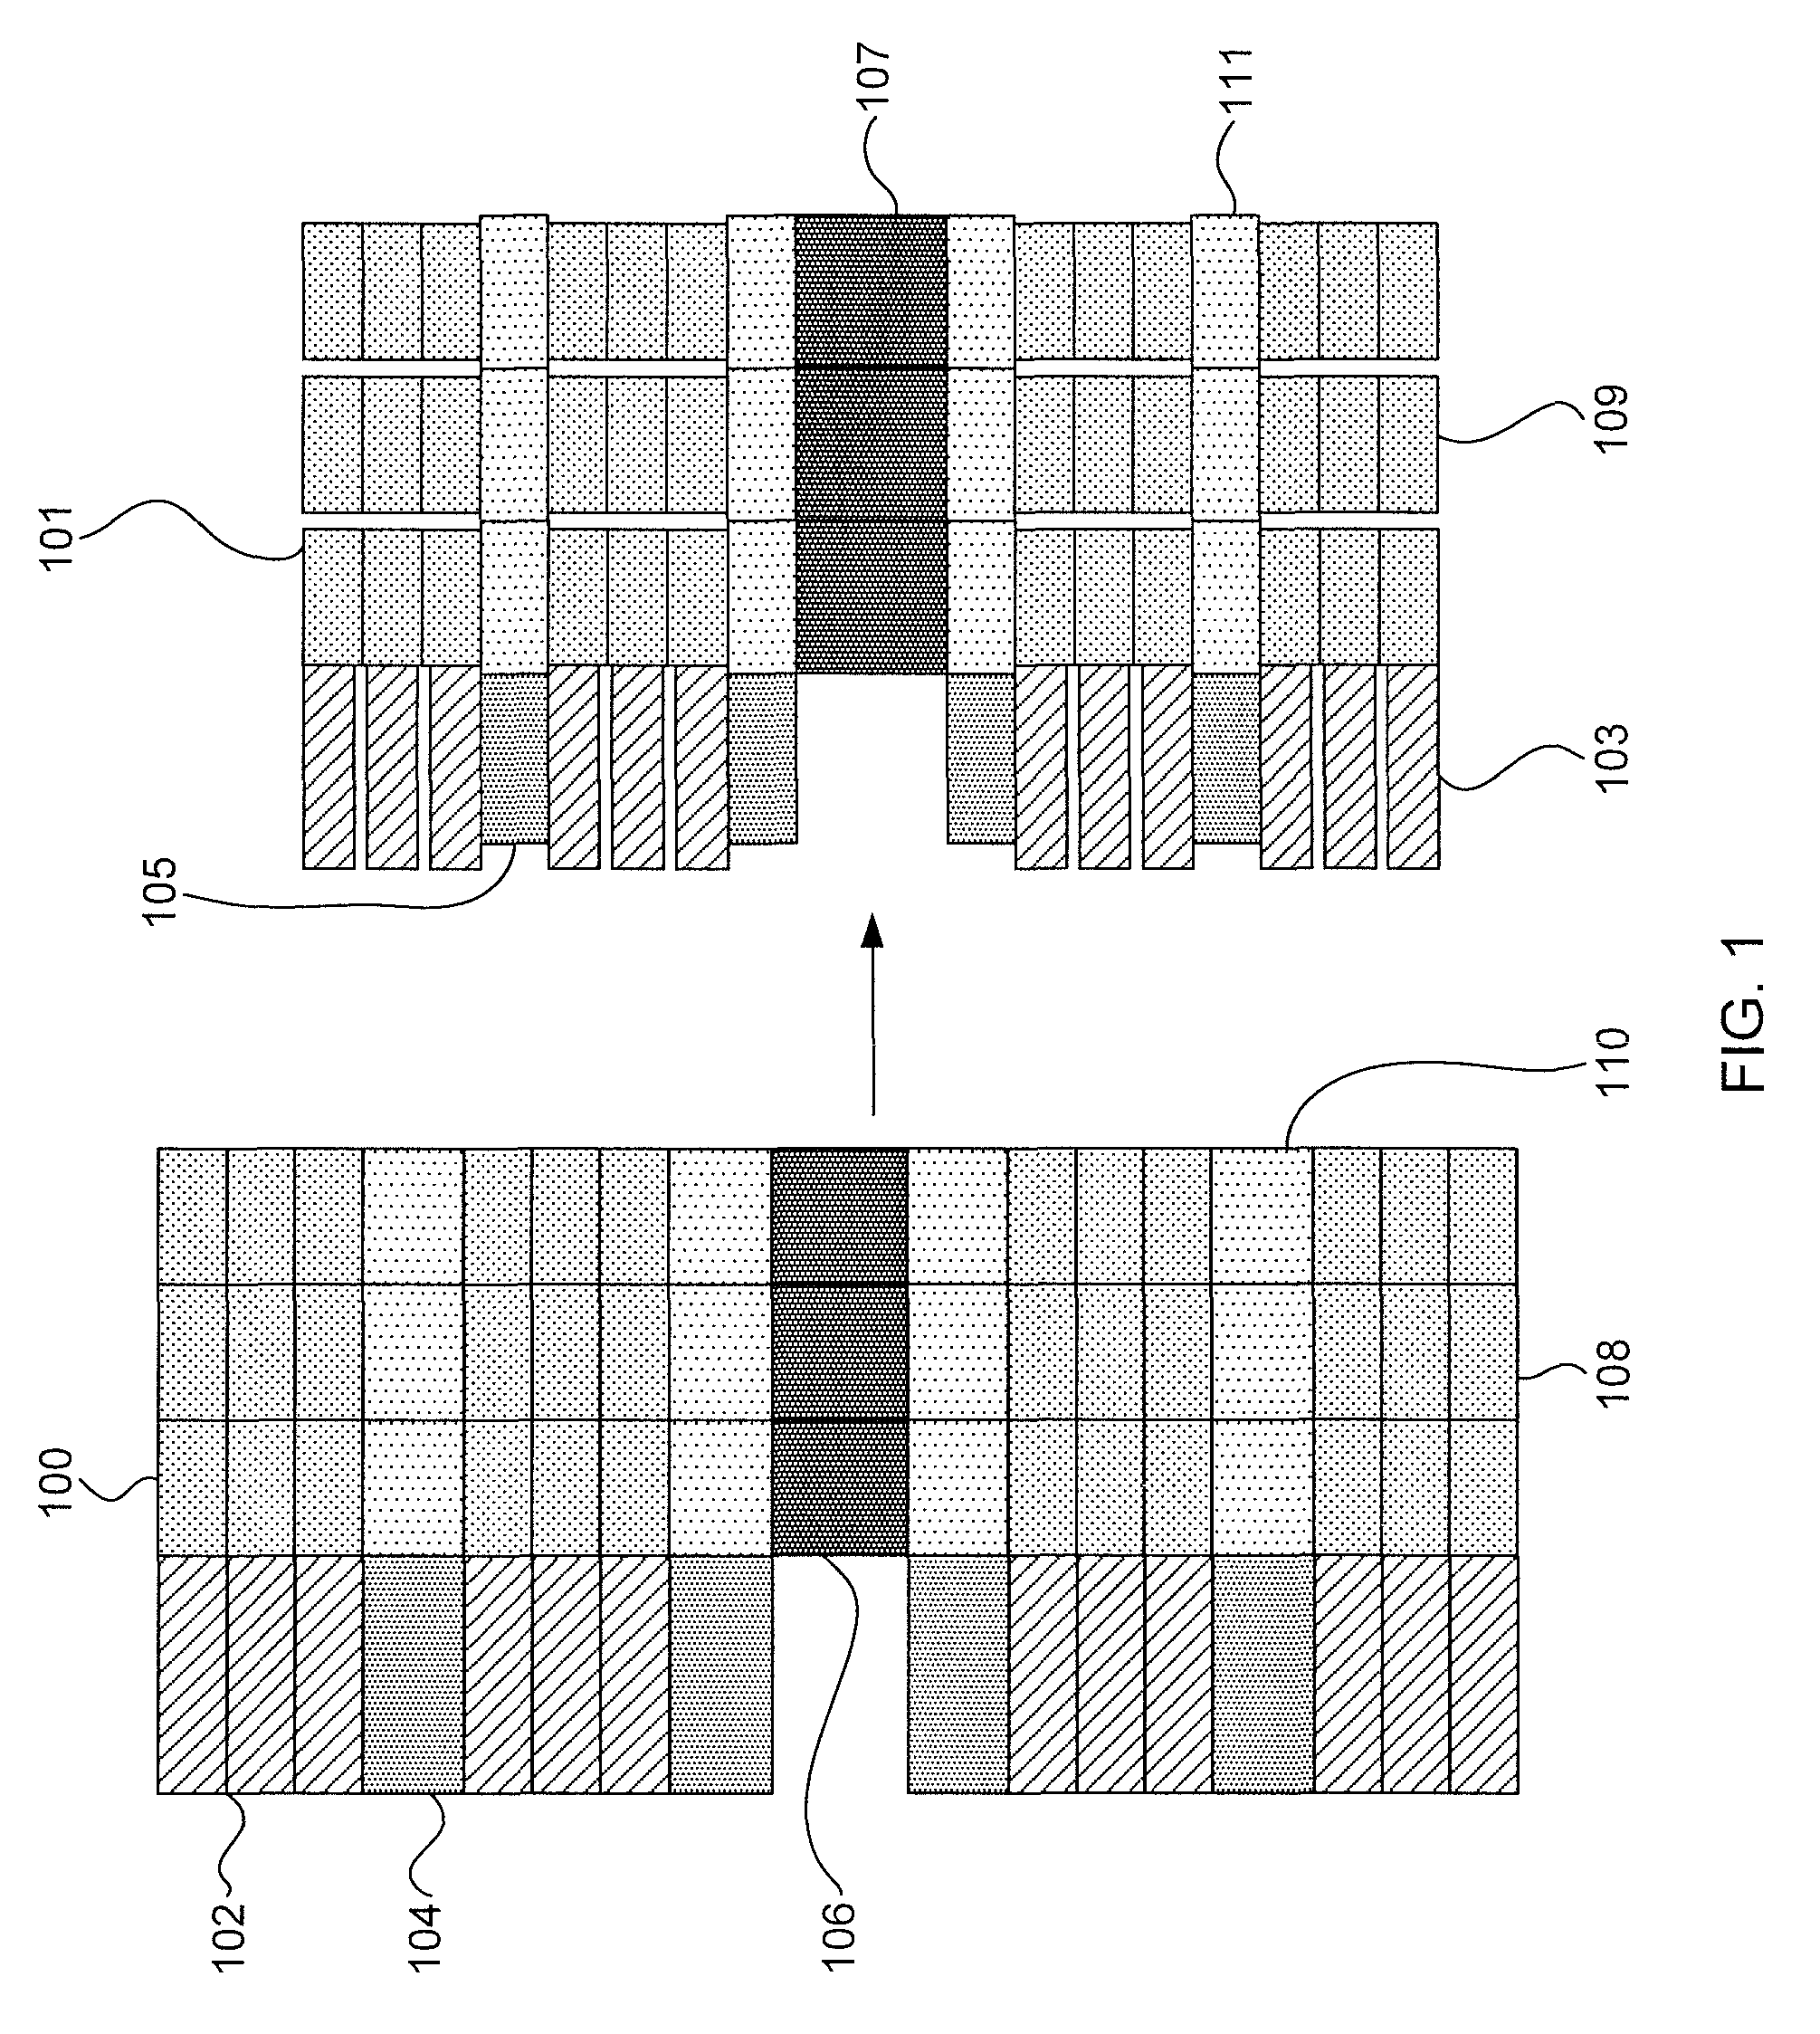 Structural migration of integrated circuit layout